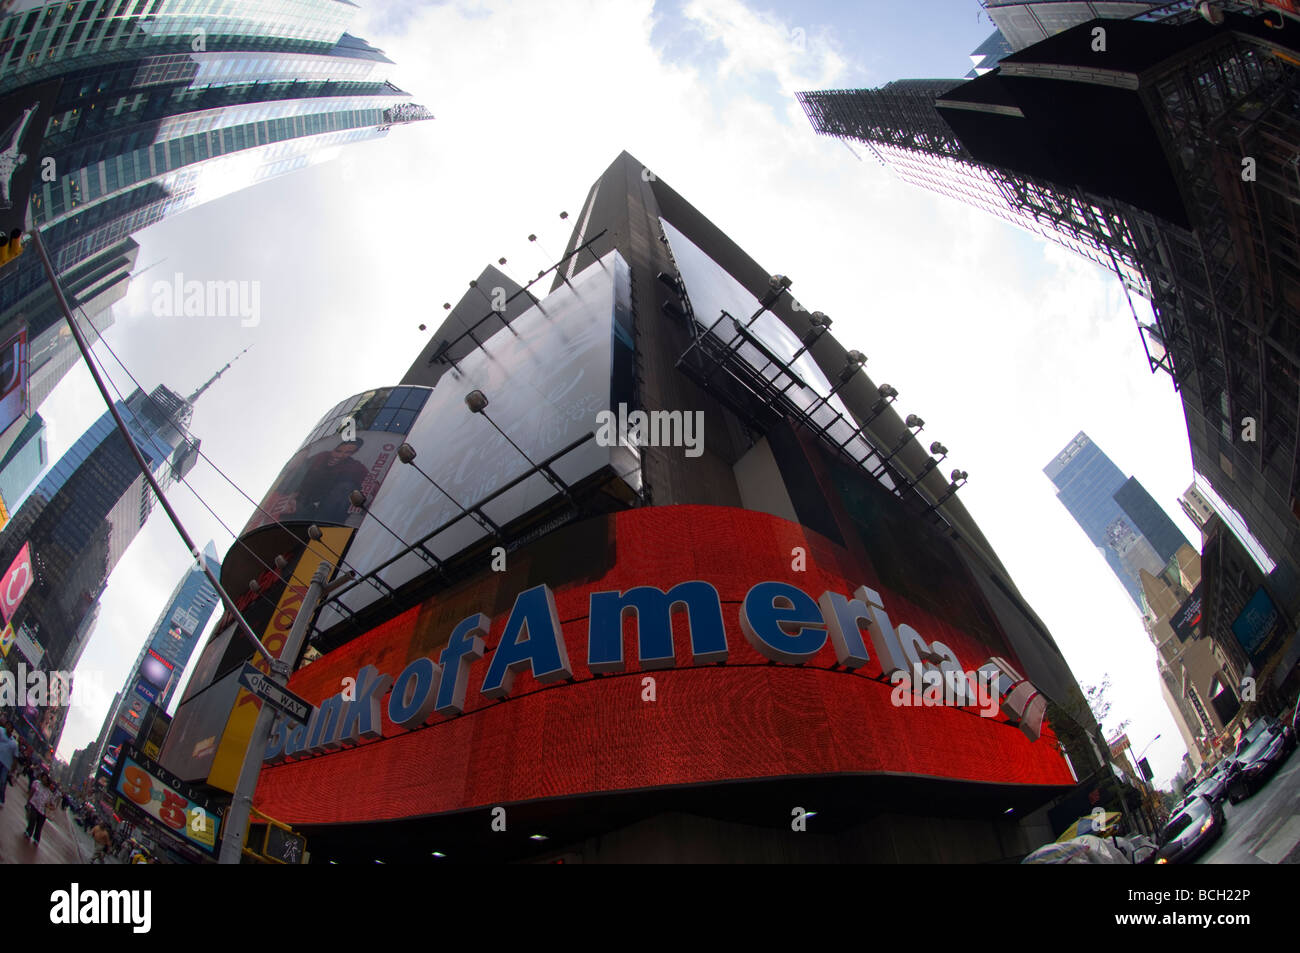 The Bank of America illuminated sign in Times Square in New York on Thursday July 2 2009 Frances M Roberts Stock Photo